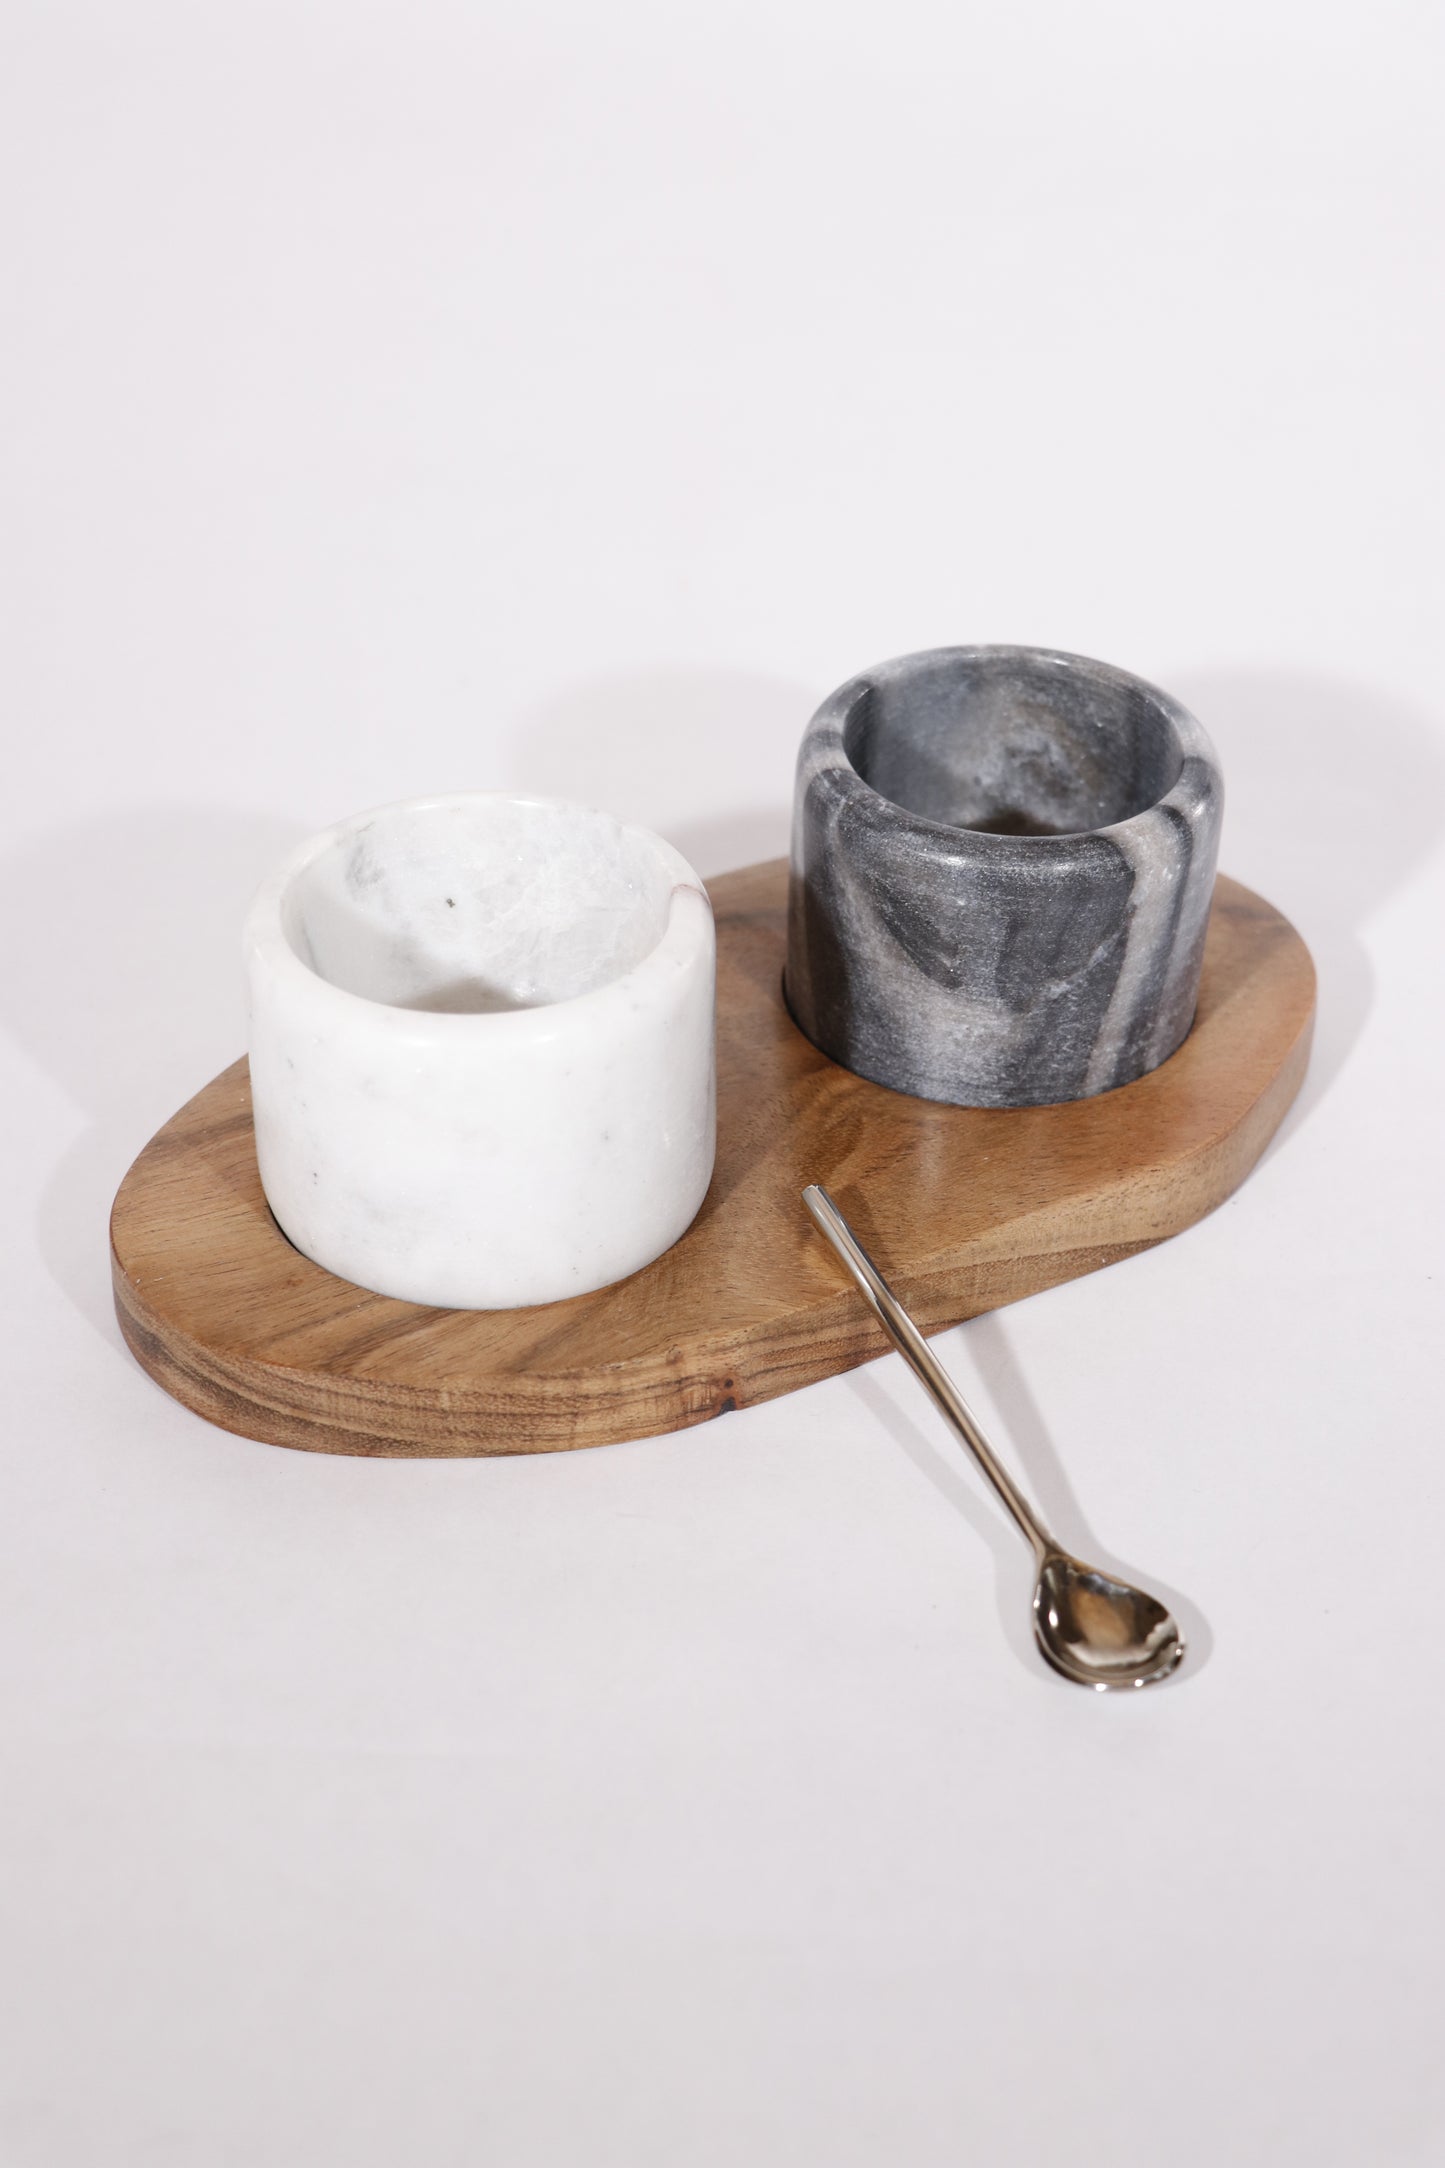 Marble and Acacia Wood Salt and Pepper Pinch Pots, Black and White, Set of 2